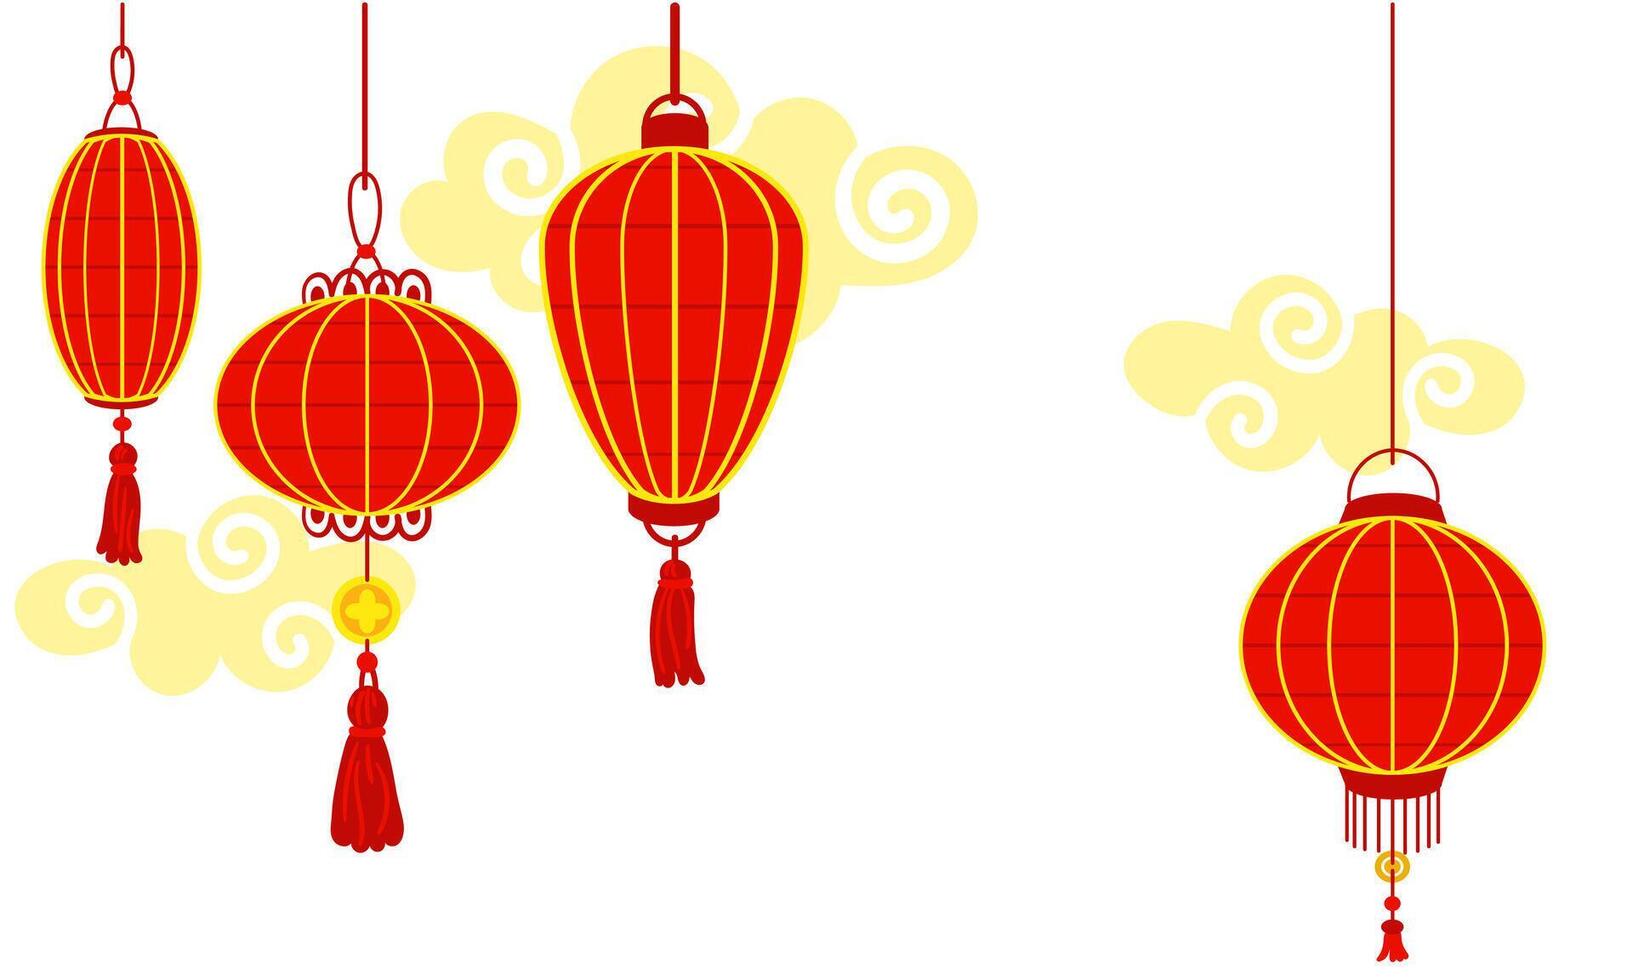 Chinese red paper lanterns hang in a row against a background of clouds, reminiscent of cultural wealth and a festive atmosphere. A festival for good luck. Festive themes, cultural presentations. Moon vector